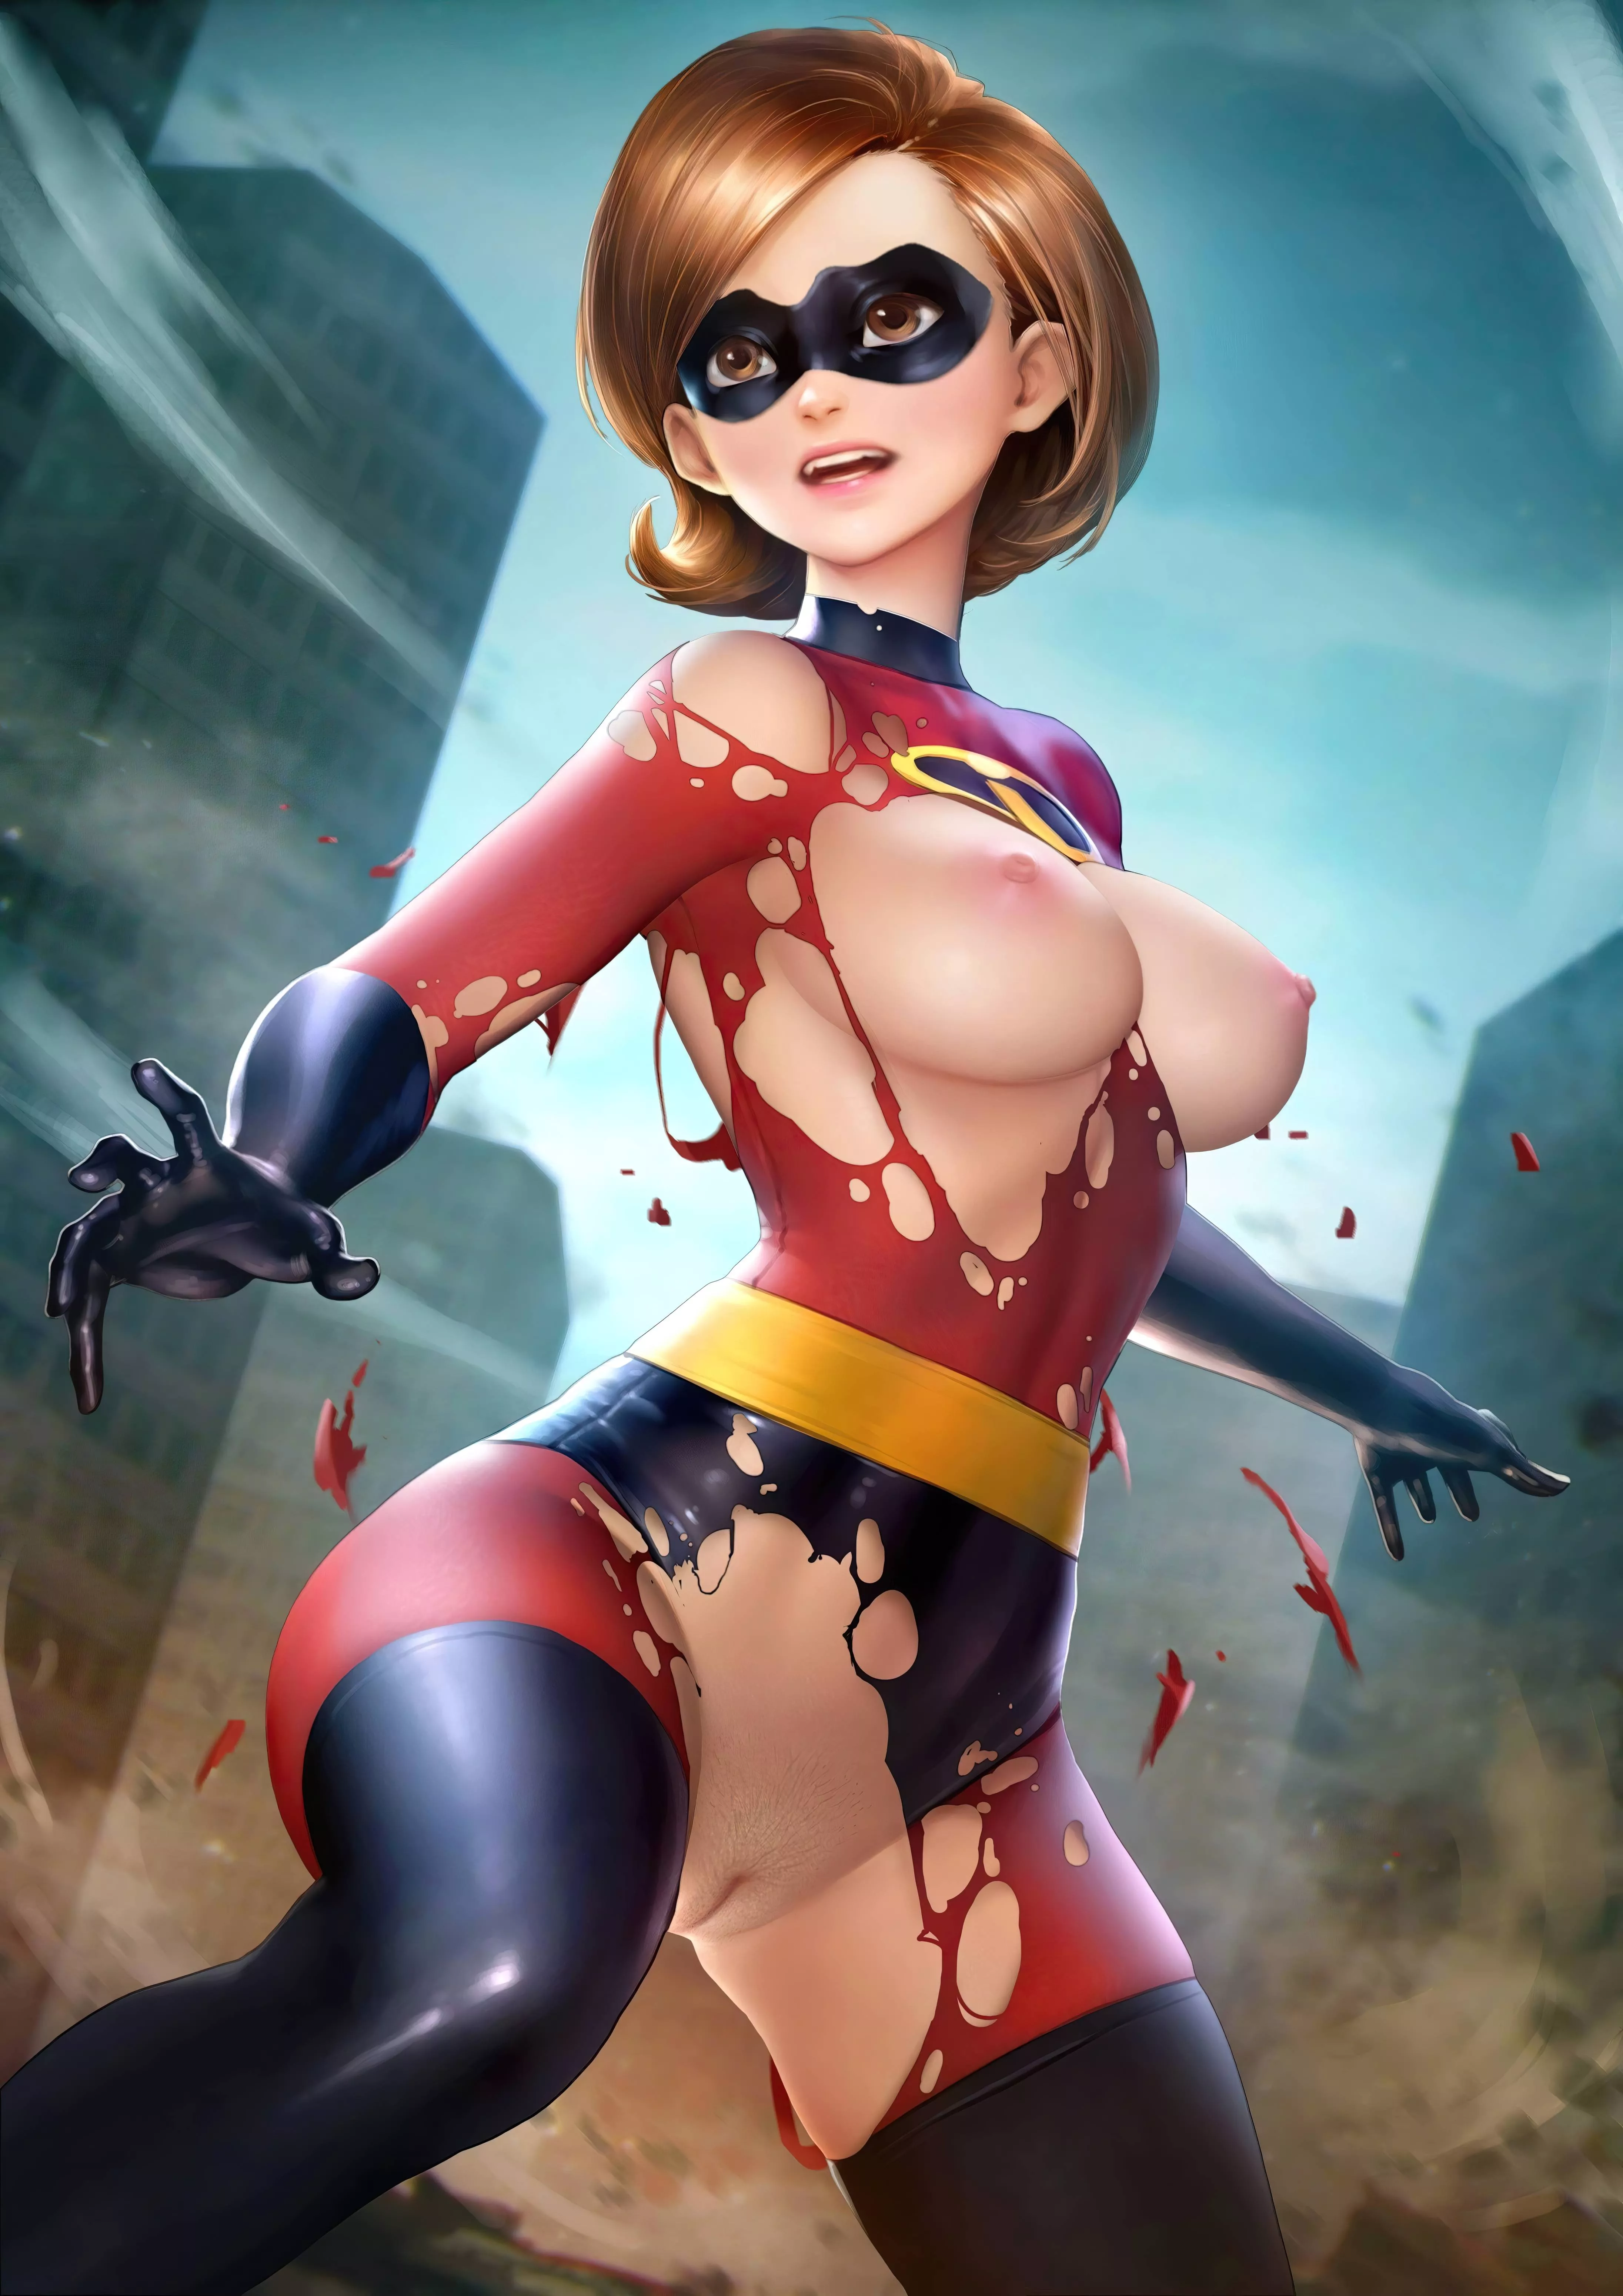 4383px x 6200px - Helen Parr - Elastigirl - (The Incredibles) - [NeoArtCorE] nudes :  rule34cartoons | NUDE-PICS.ORG